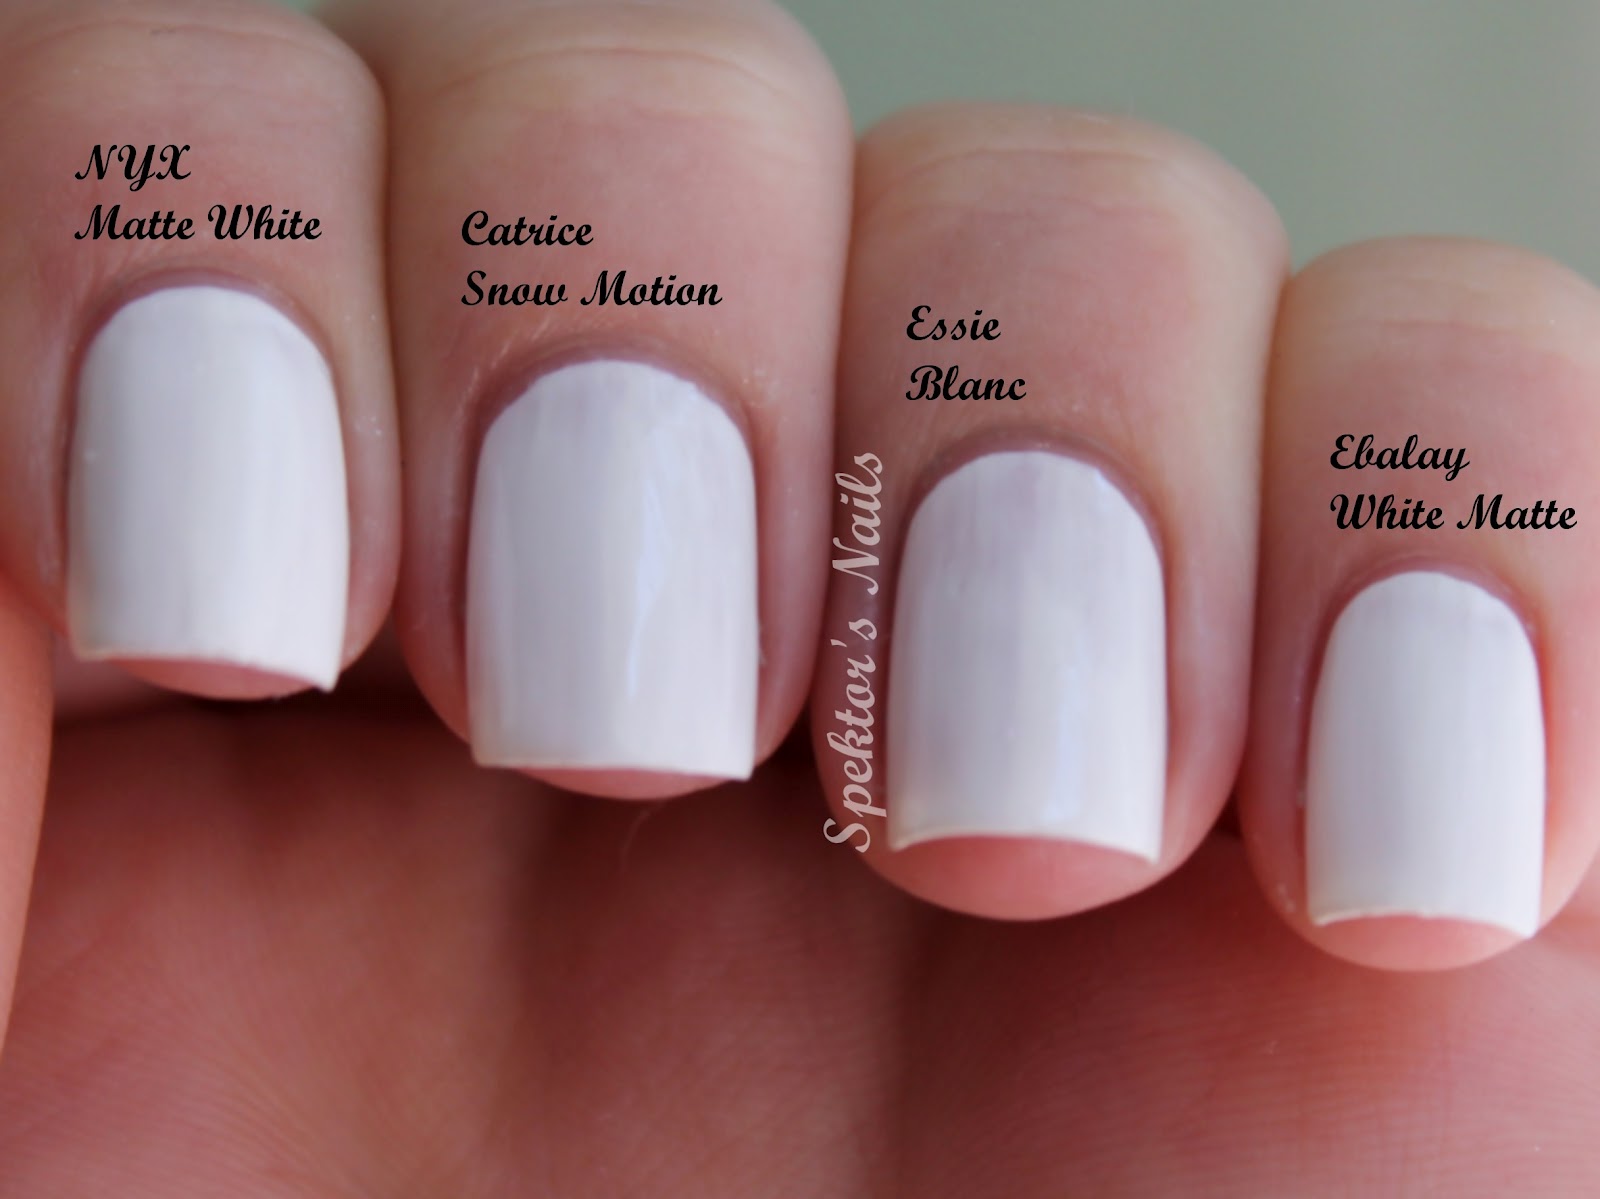 4. "The Top Nail Polish Shades for Pale Skin Beauties" - wide 2